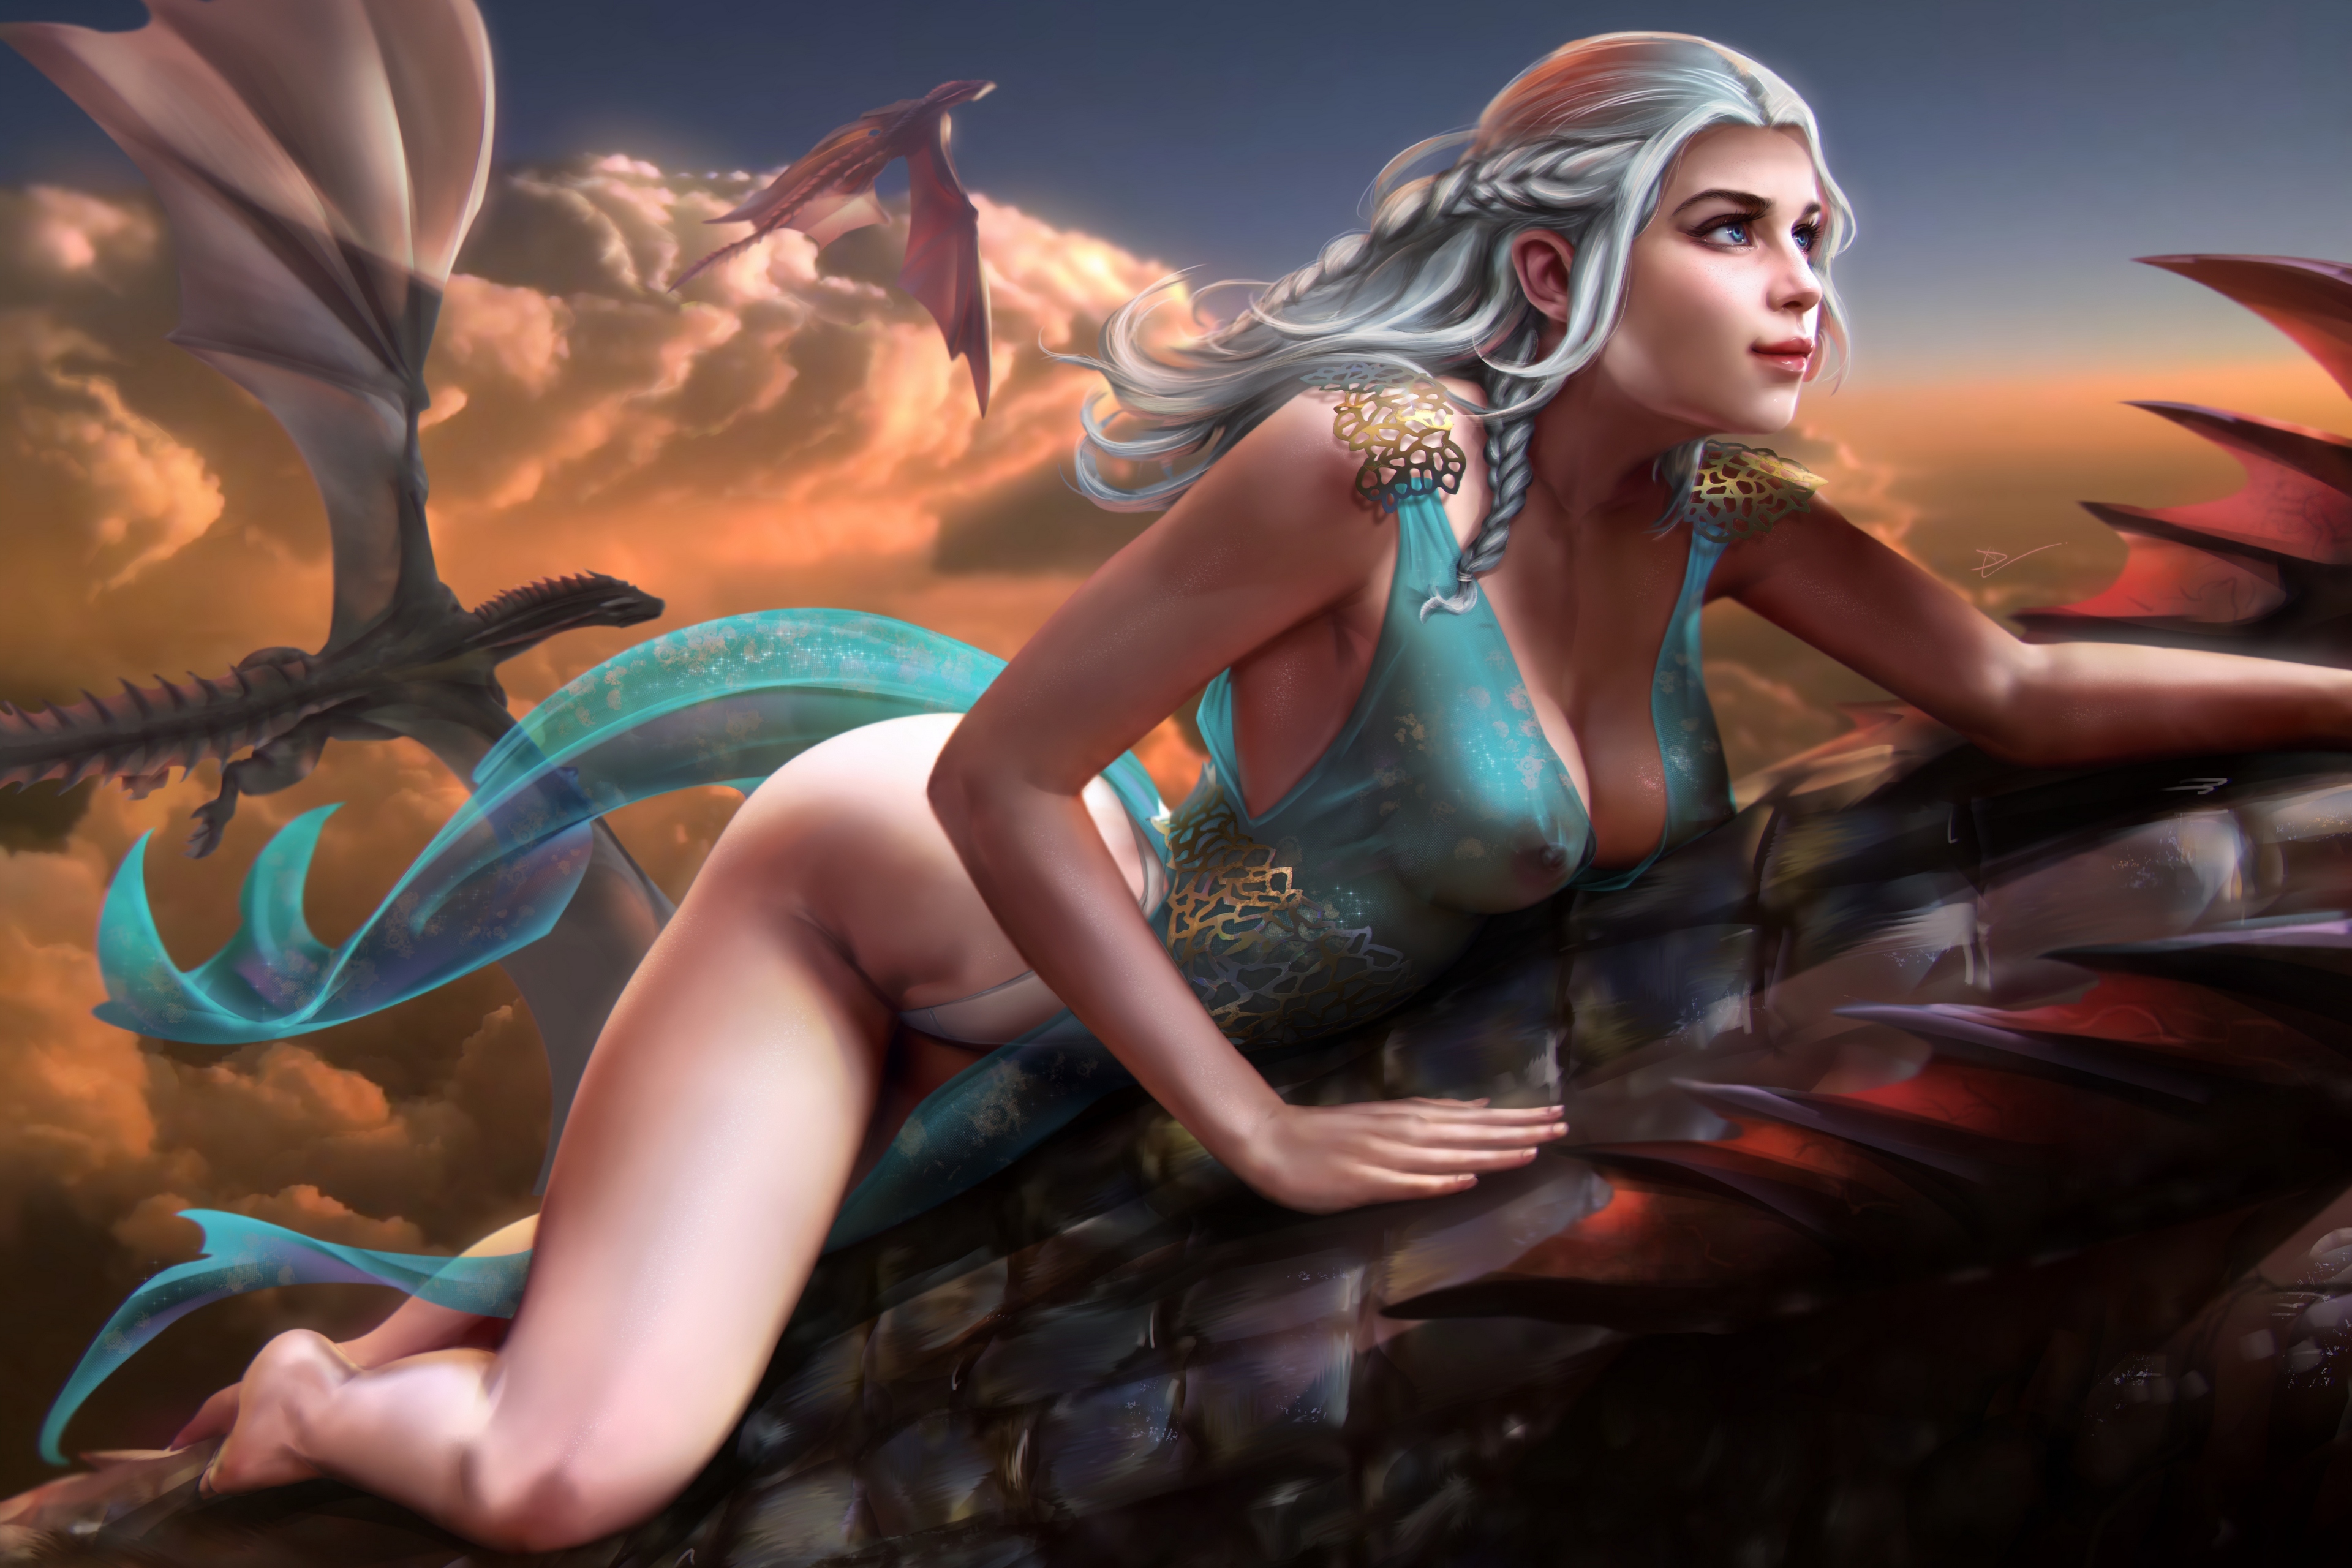 The lovely Mistress of Dragons